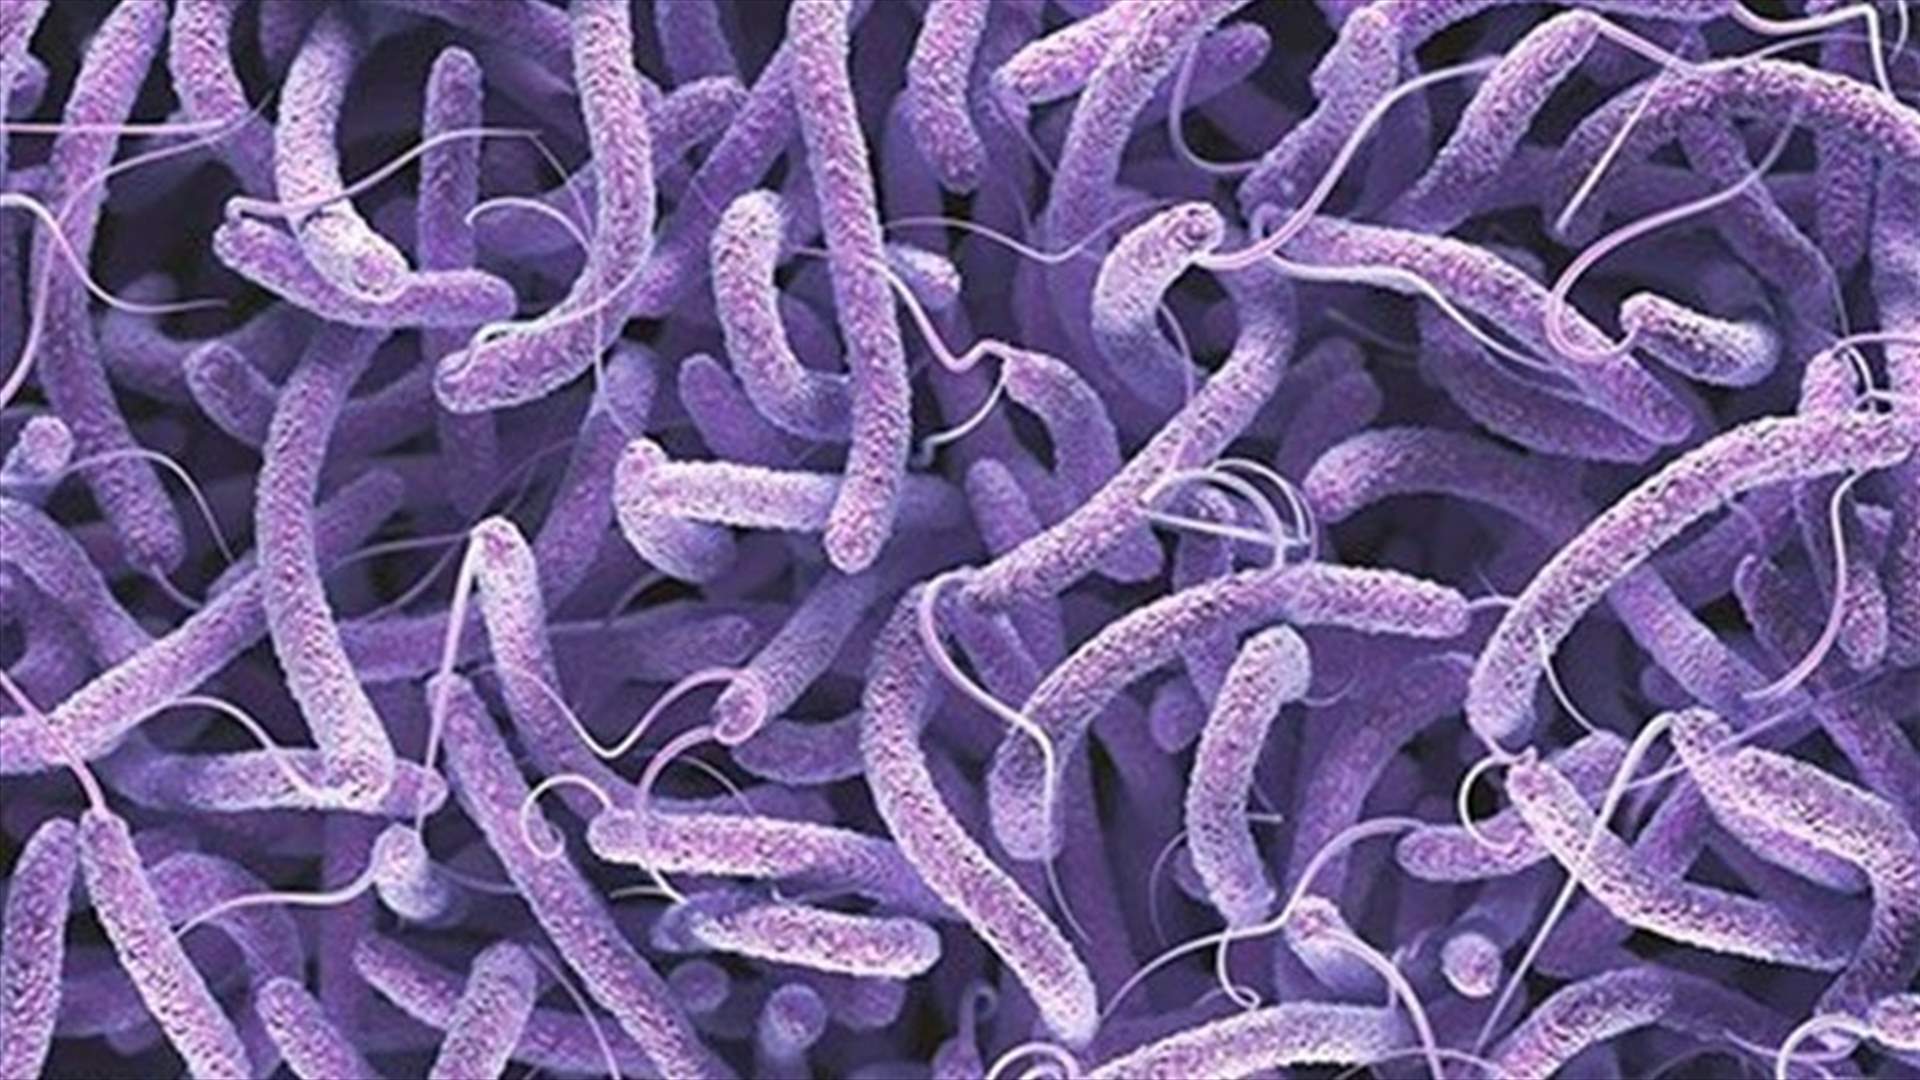 Health Ministry confirms 7 new cholera cases, no new deaths